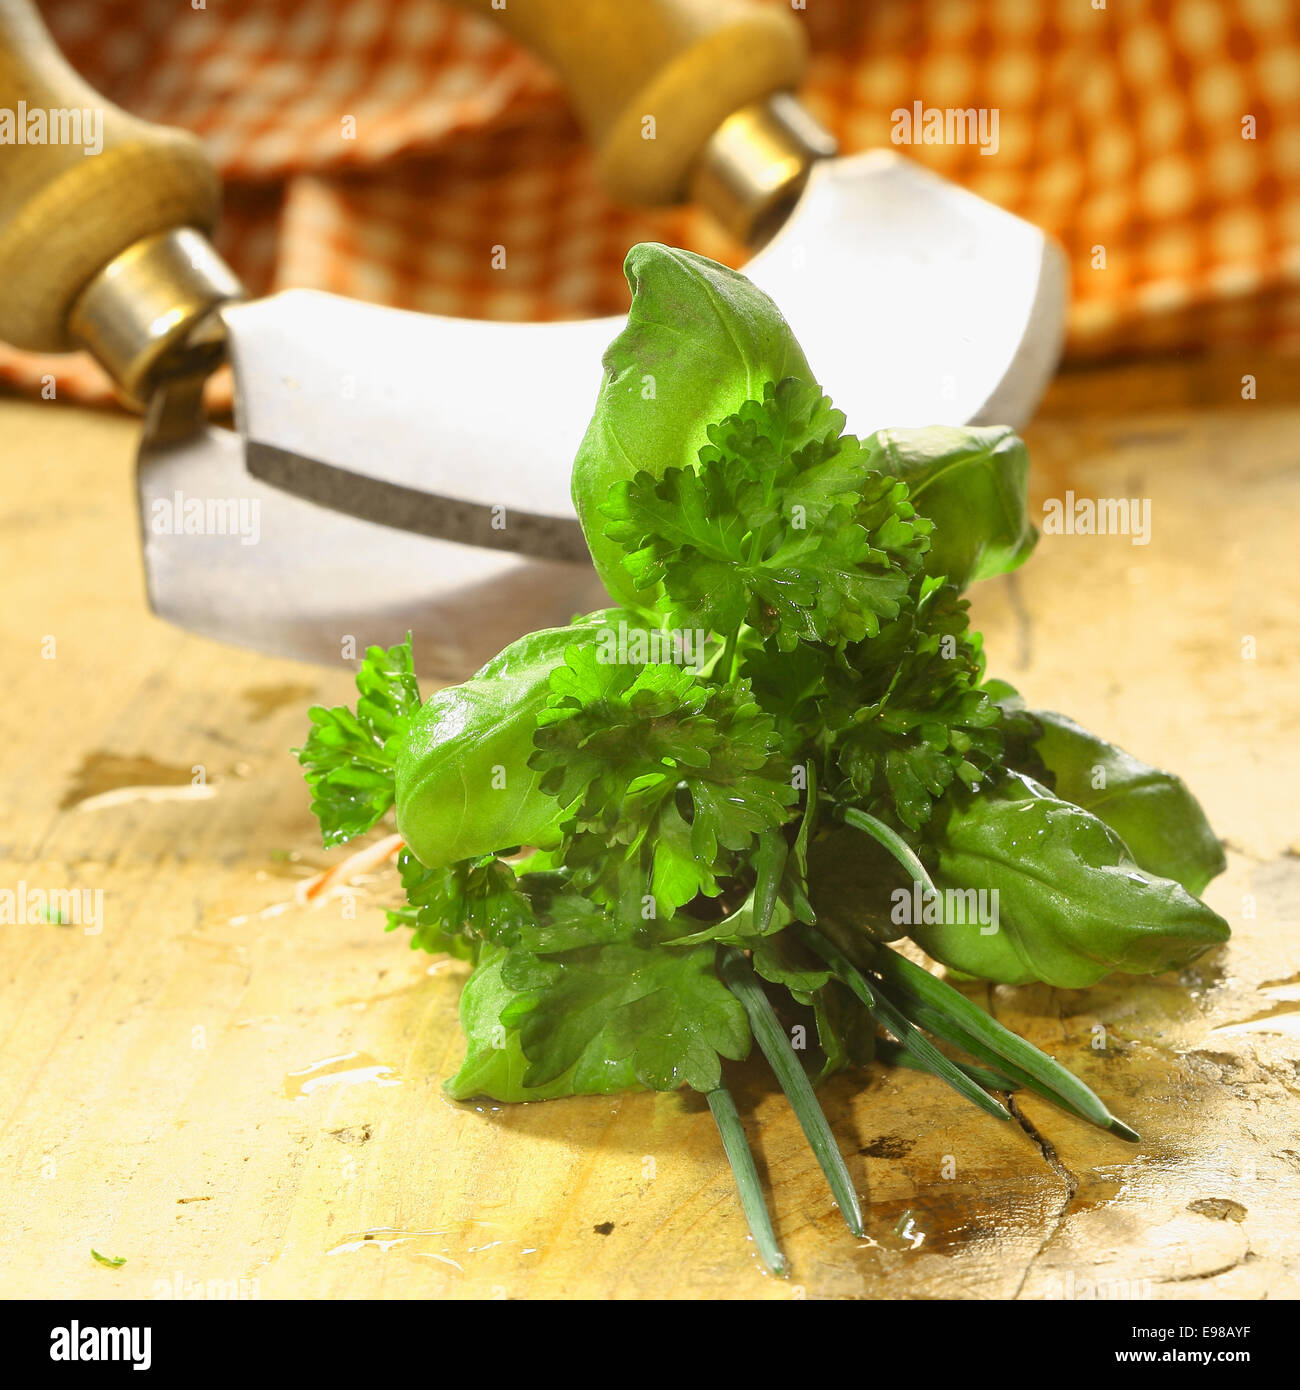 Bouquet garni of fresh herbs including basil, crinkly leaf parsley and chives lying on a wooden table in front of a chopping blade Stock Photo